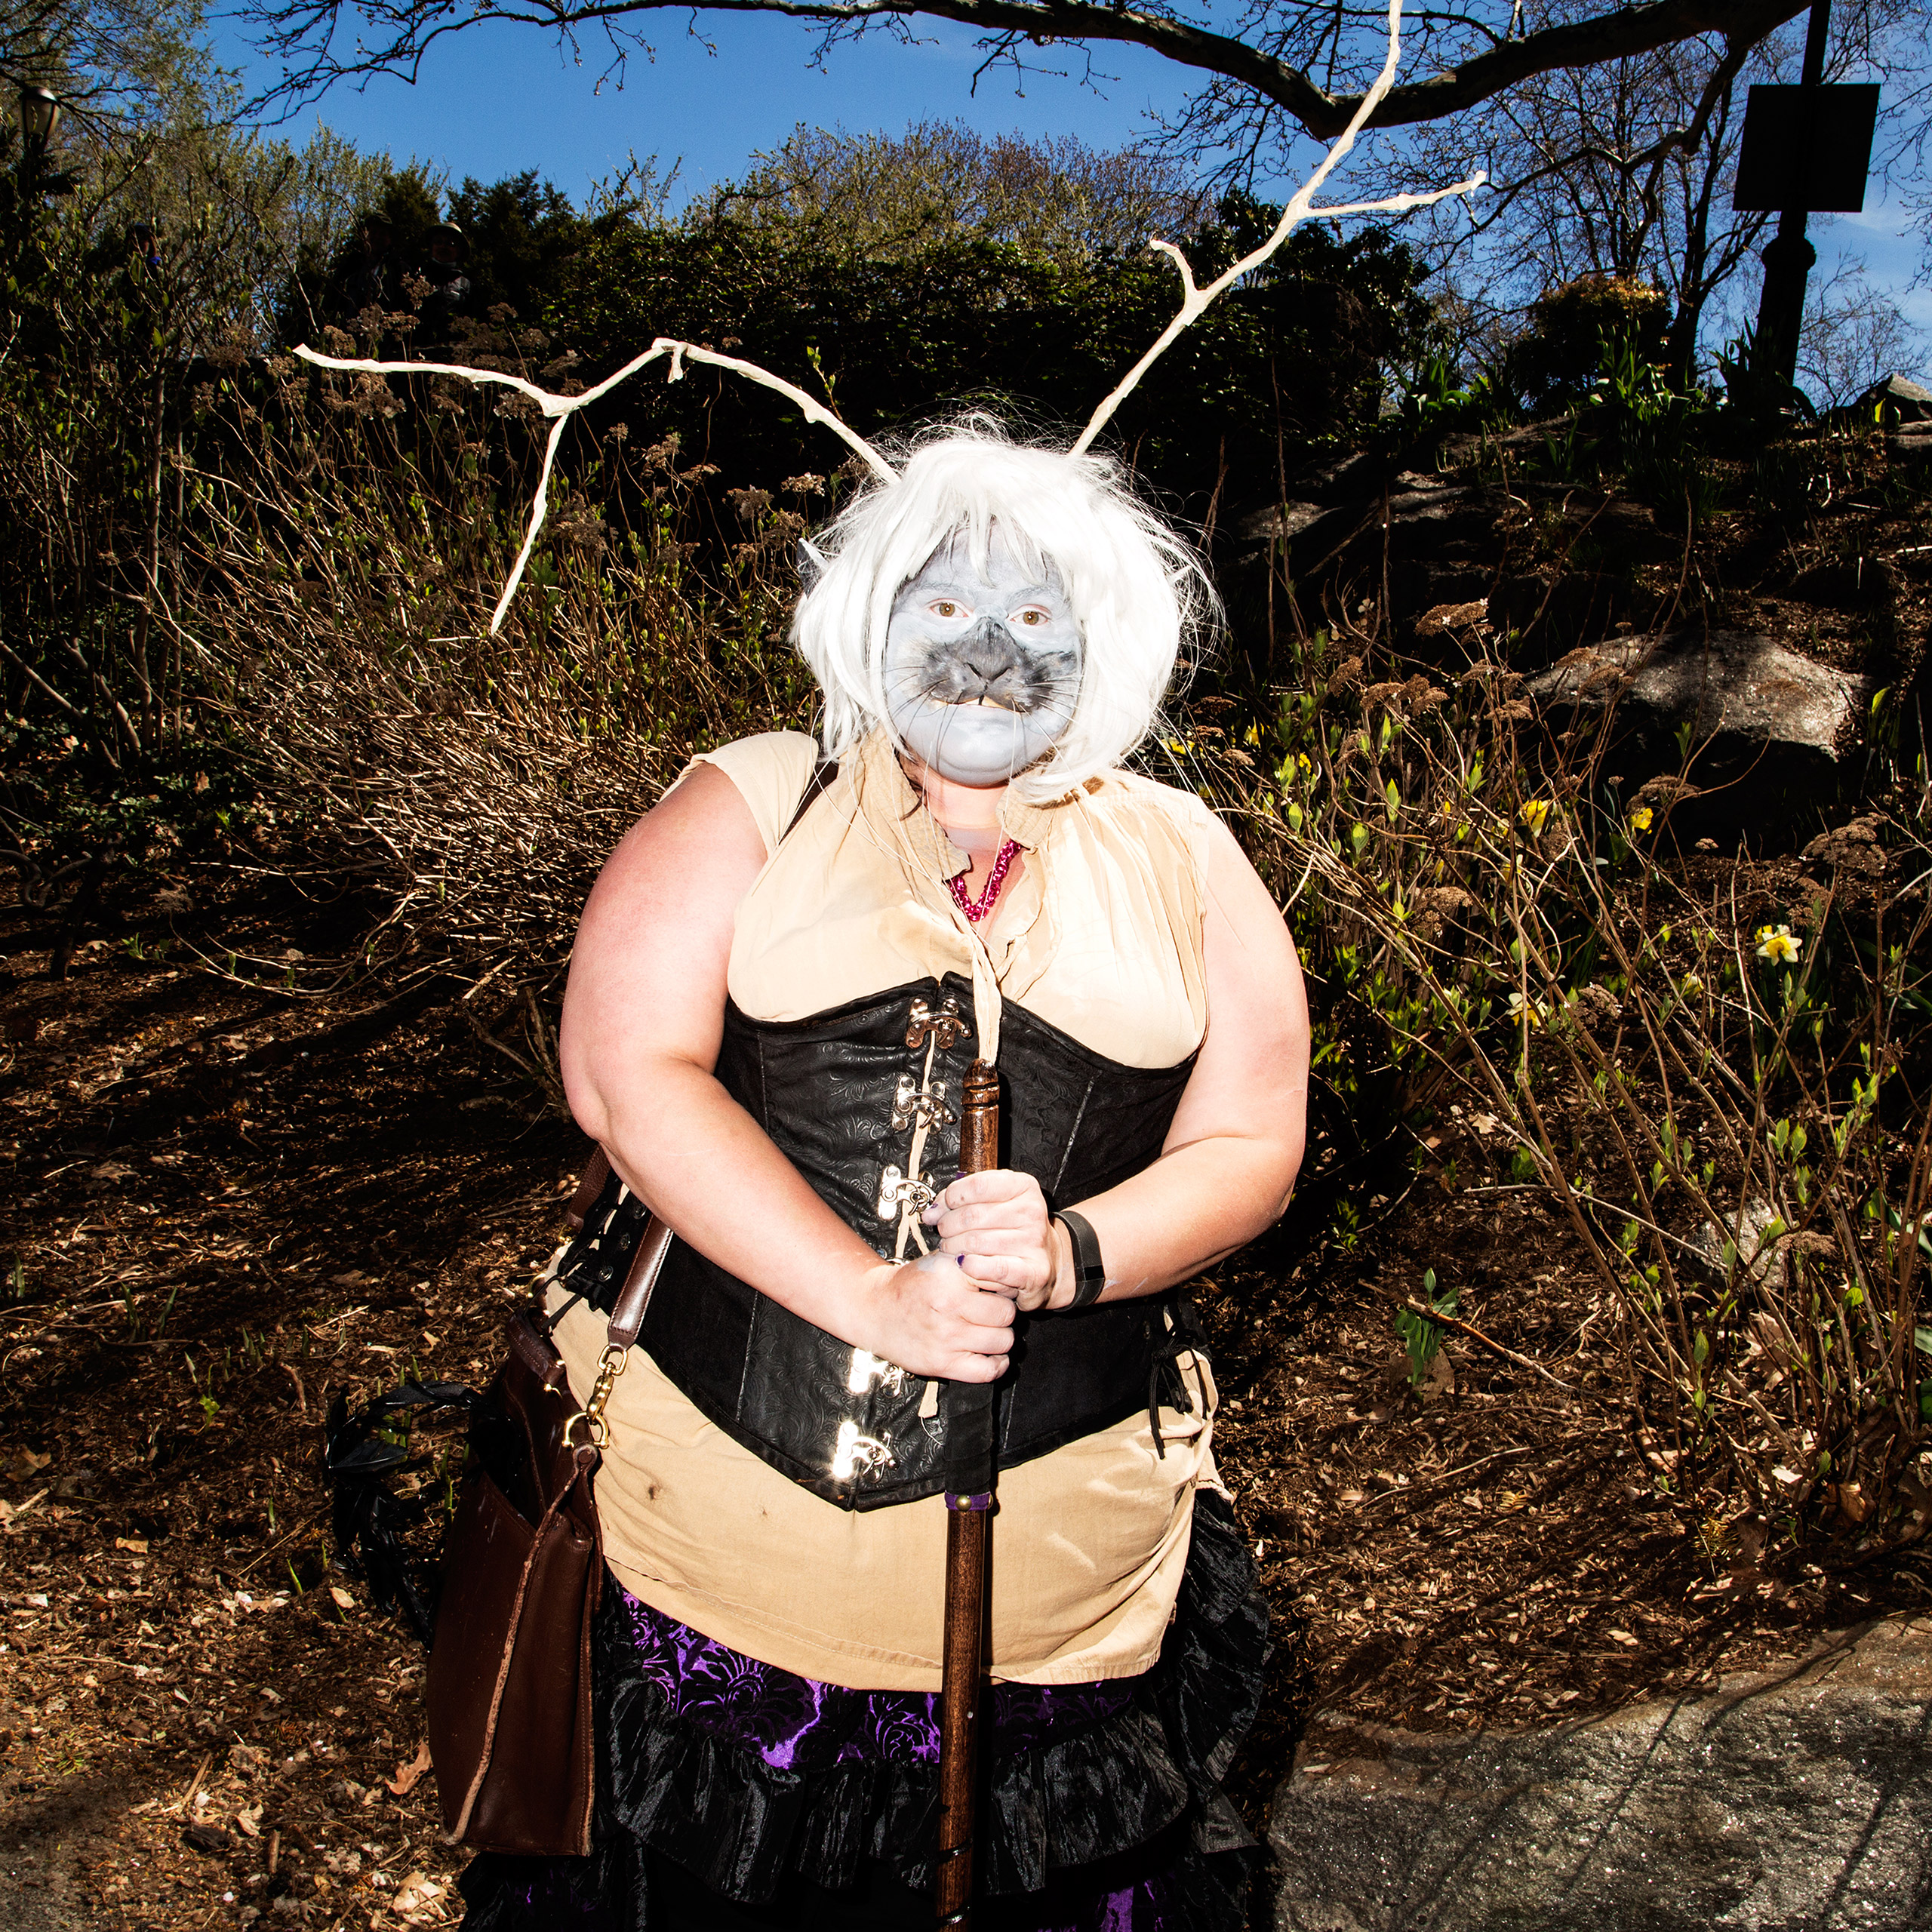 Ana Gondring, a member, at a cosplay day in Fort Tyron park.